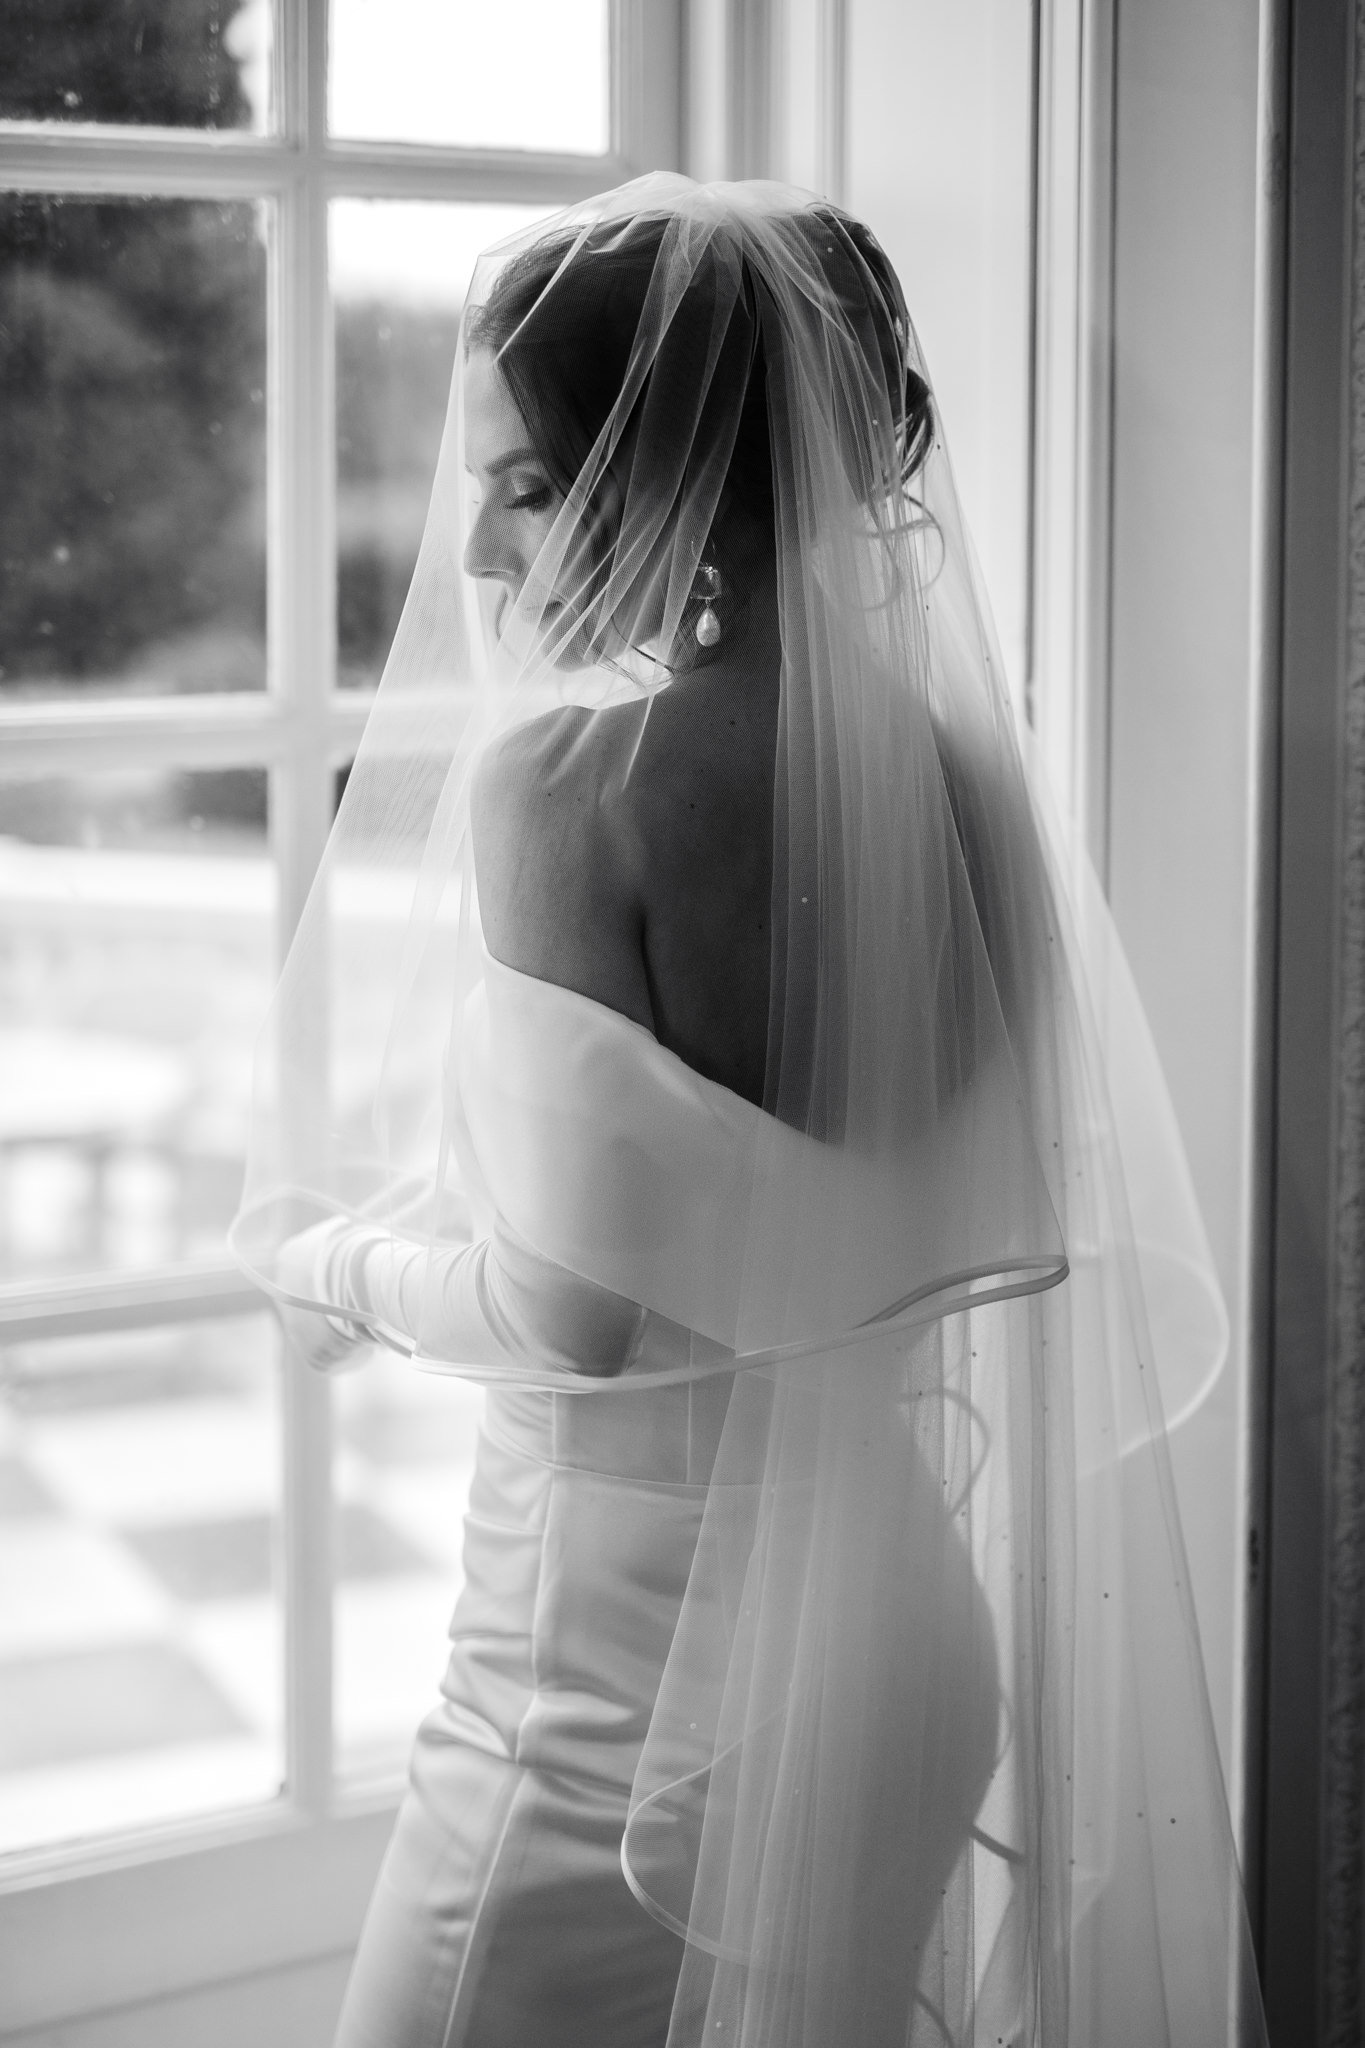 editorial style portrait of a bride standing in front of a window before her wedding